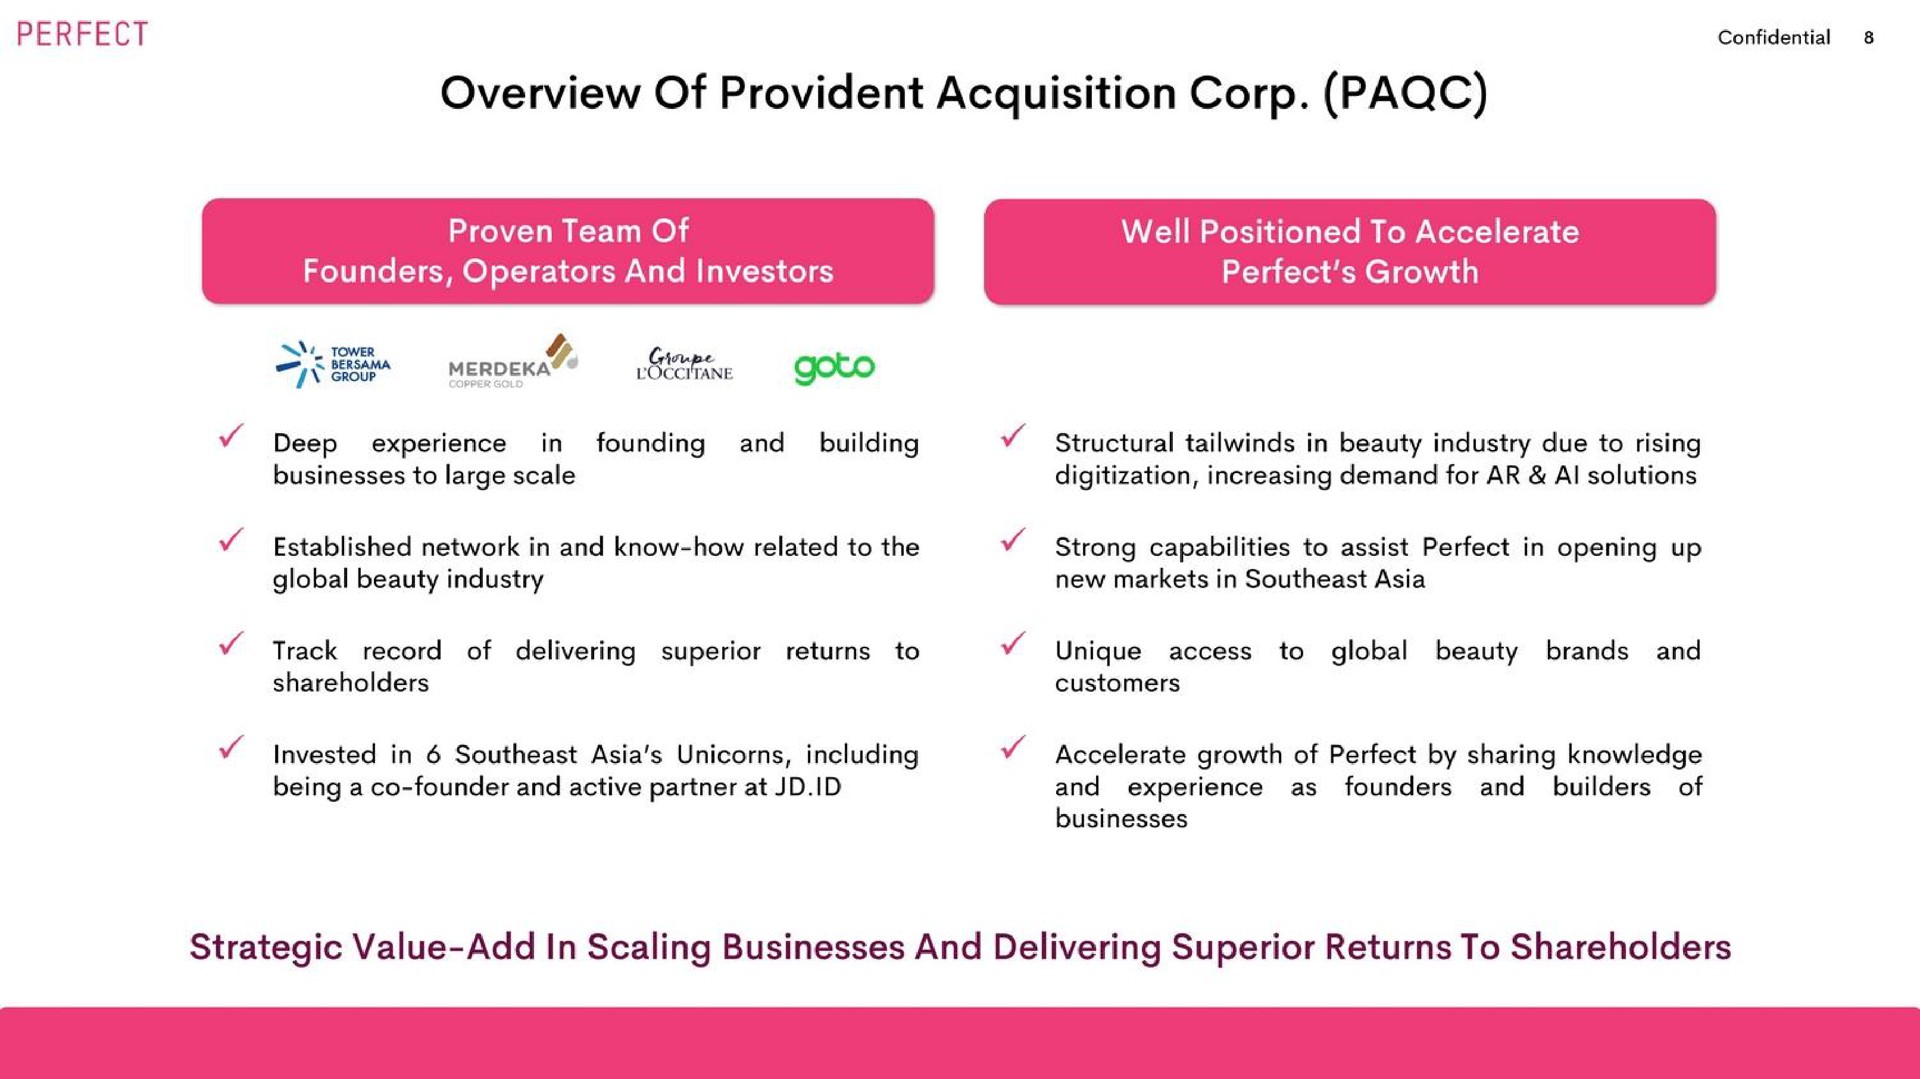 overview of provident acquisition corp strategic value add in scaling businesses and delivering superior returns to shareholders | Perfect